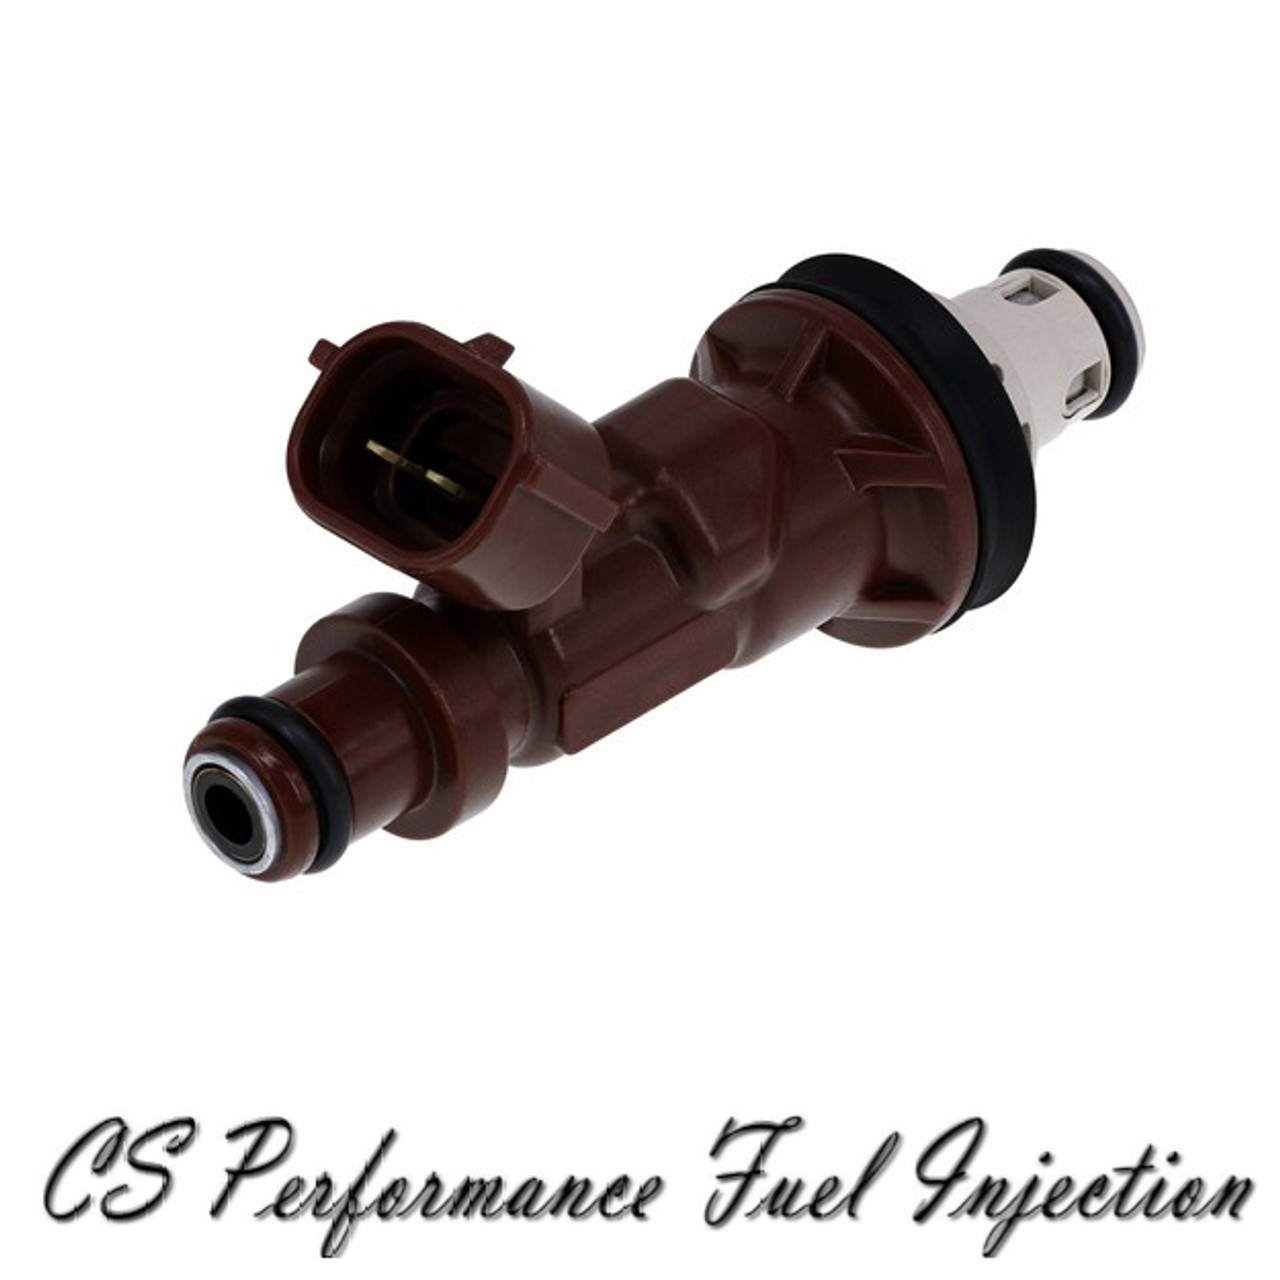 SCITOO Fuel Injectors Kits, 2 Hole New OEM Brown Fuel Injector for